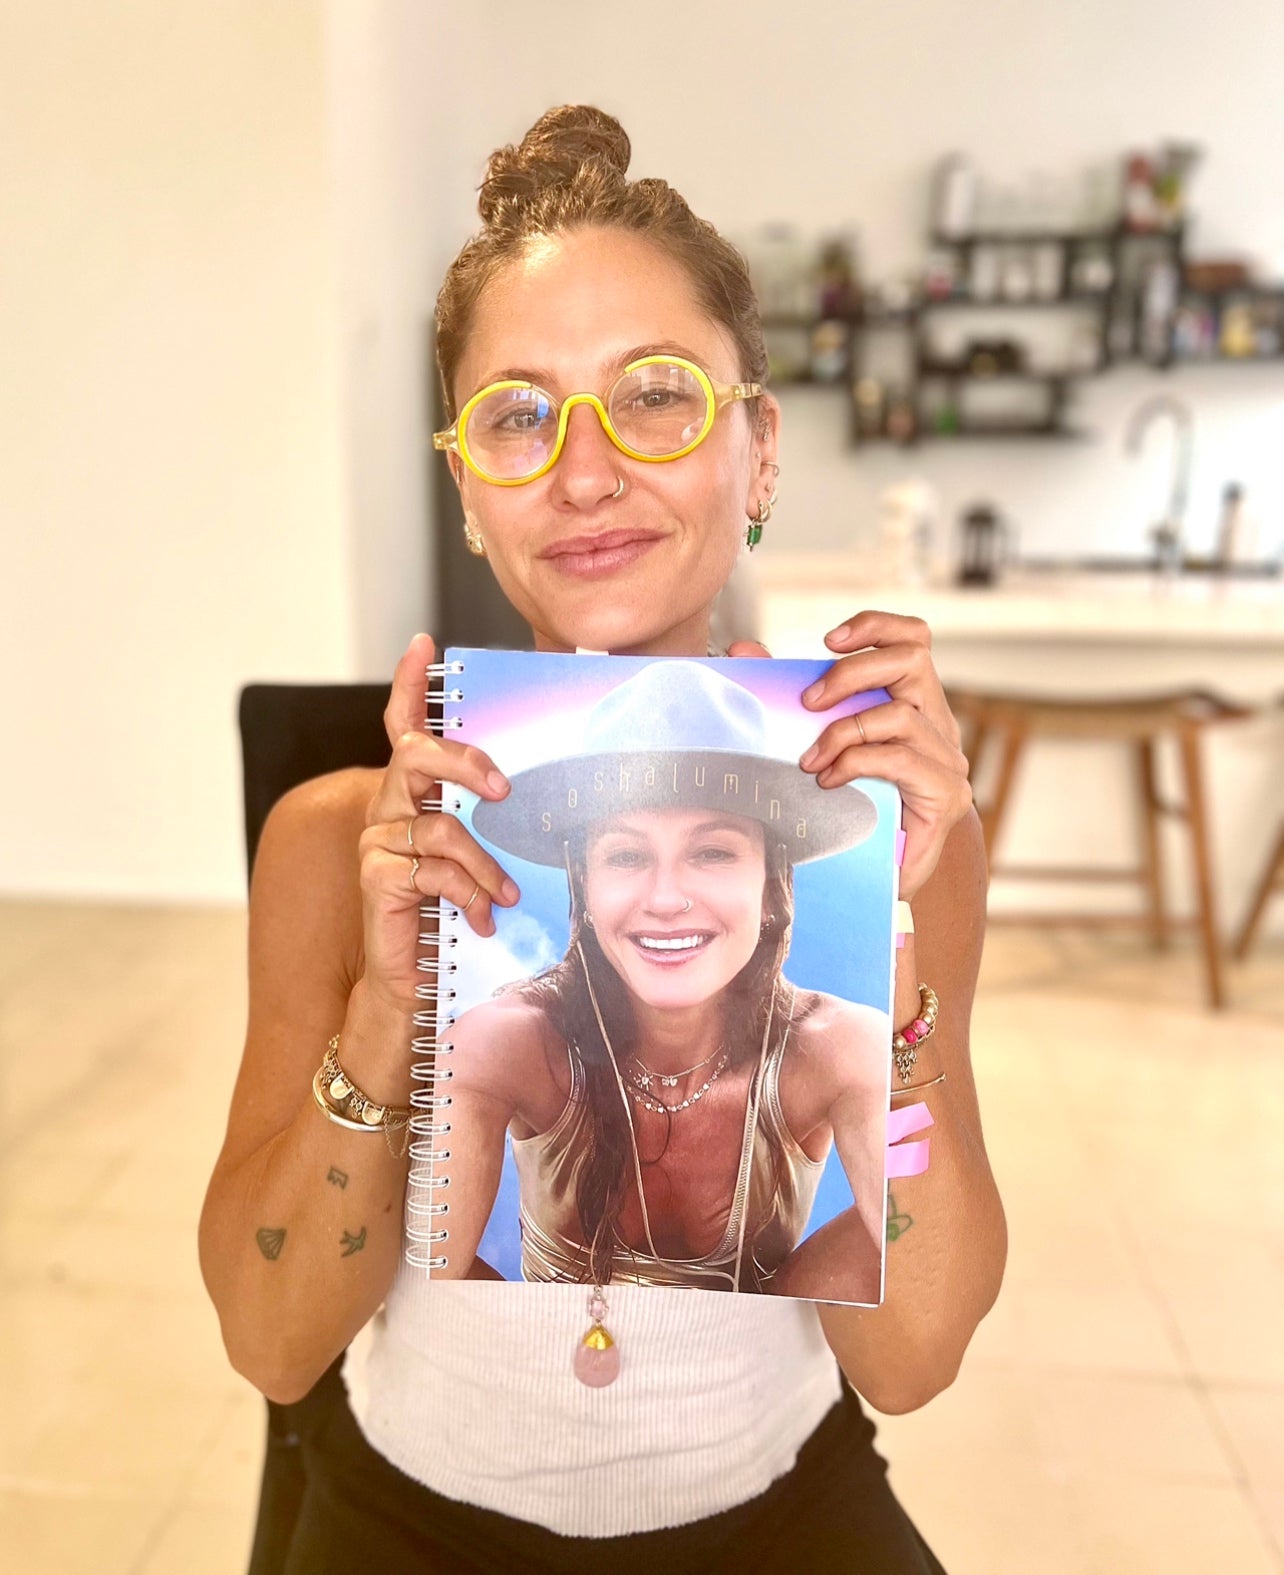 Load video: Scosha designer testimonial for Emmanuelle Blanc Self love guide at unleash your inner wealth to recreate your reality with rituals